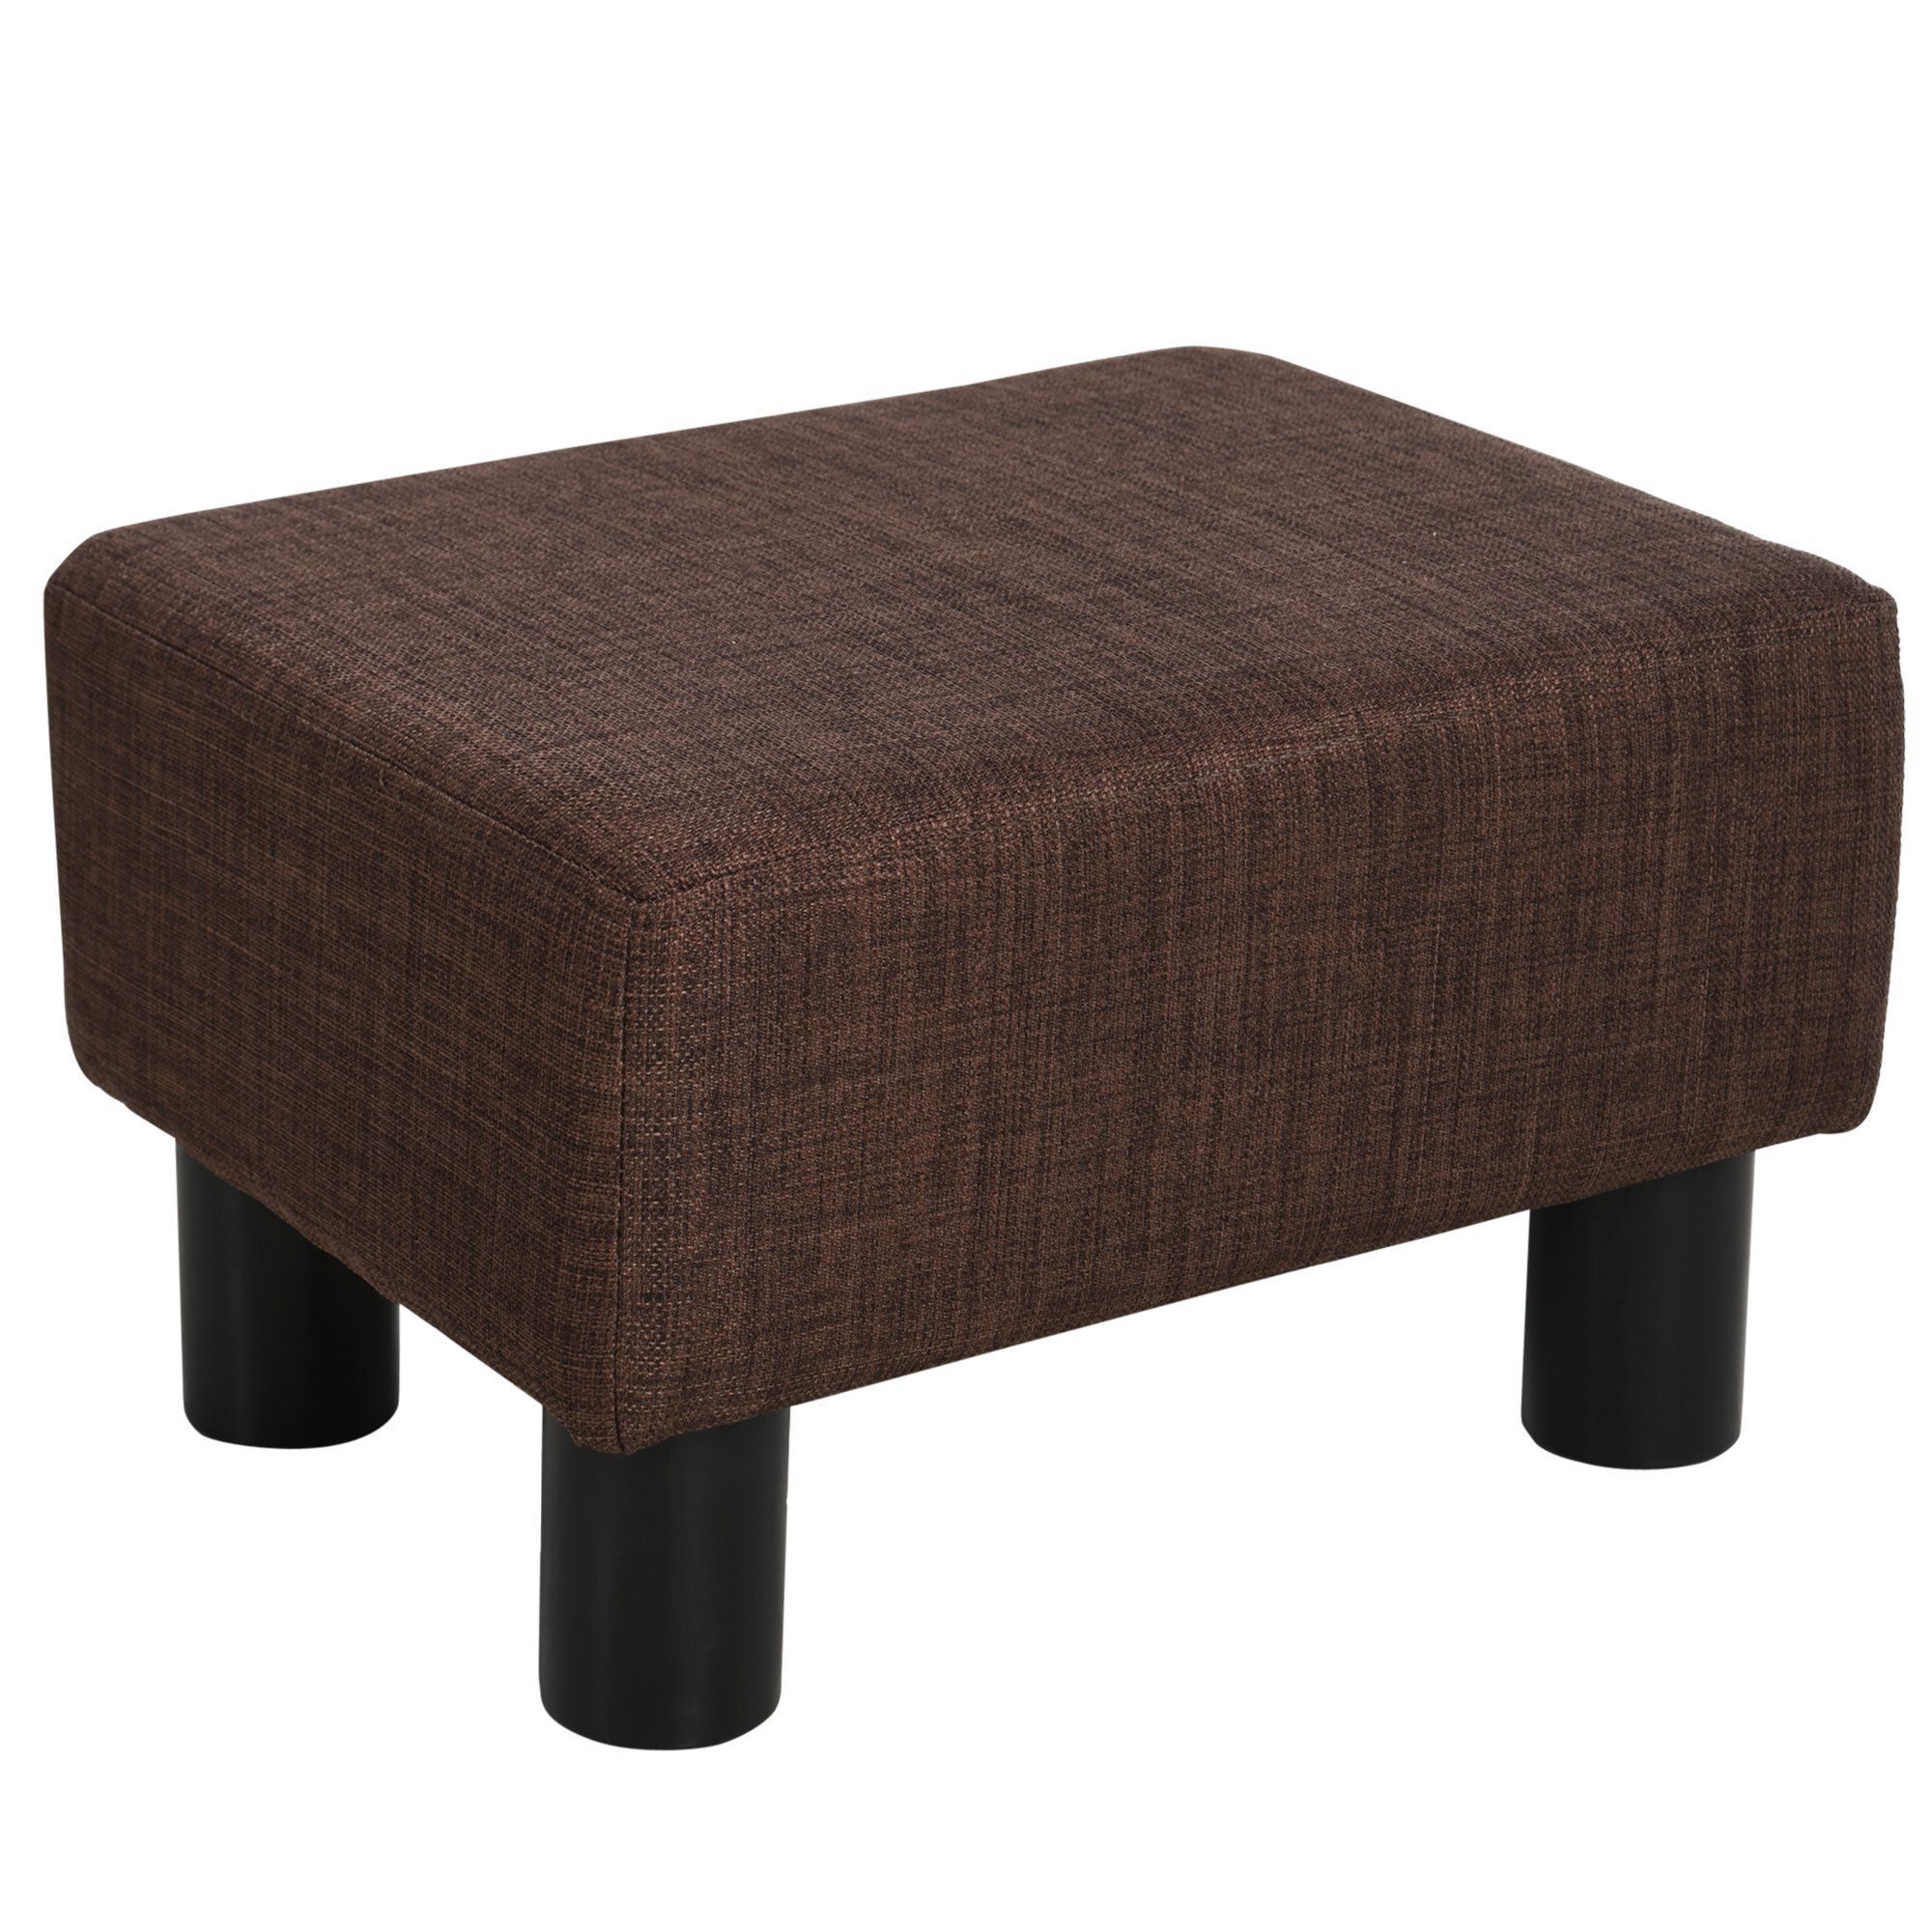 2020 Homcom Linen Fabric Footstool Ottoman Cube W/ 4 Plastic Legs Black Throughout Solid Cuboid Pouf Ottomans (View 4 of 10)